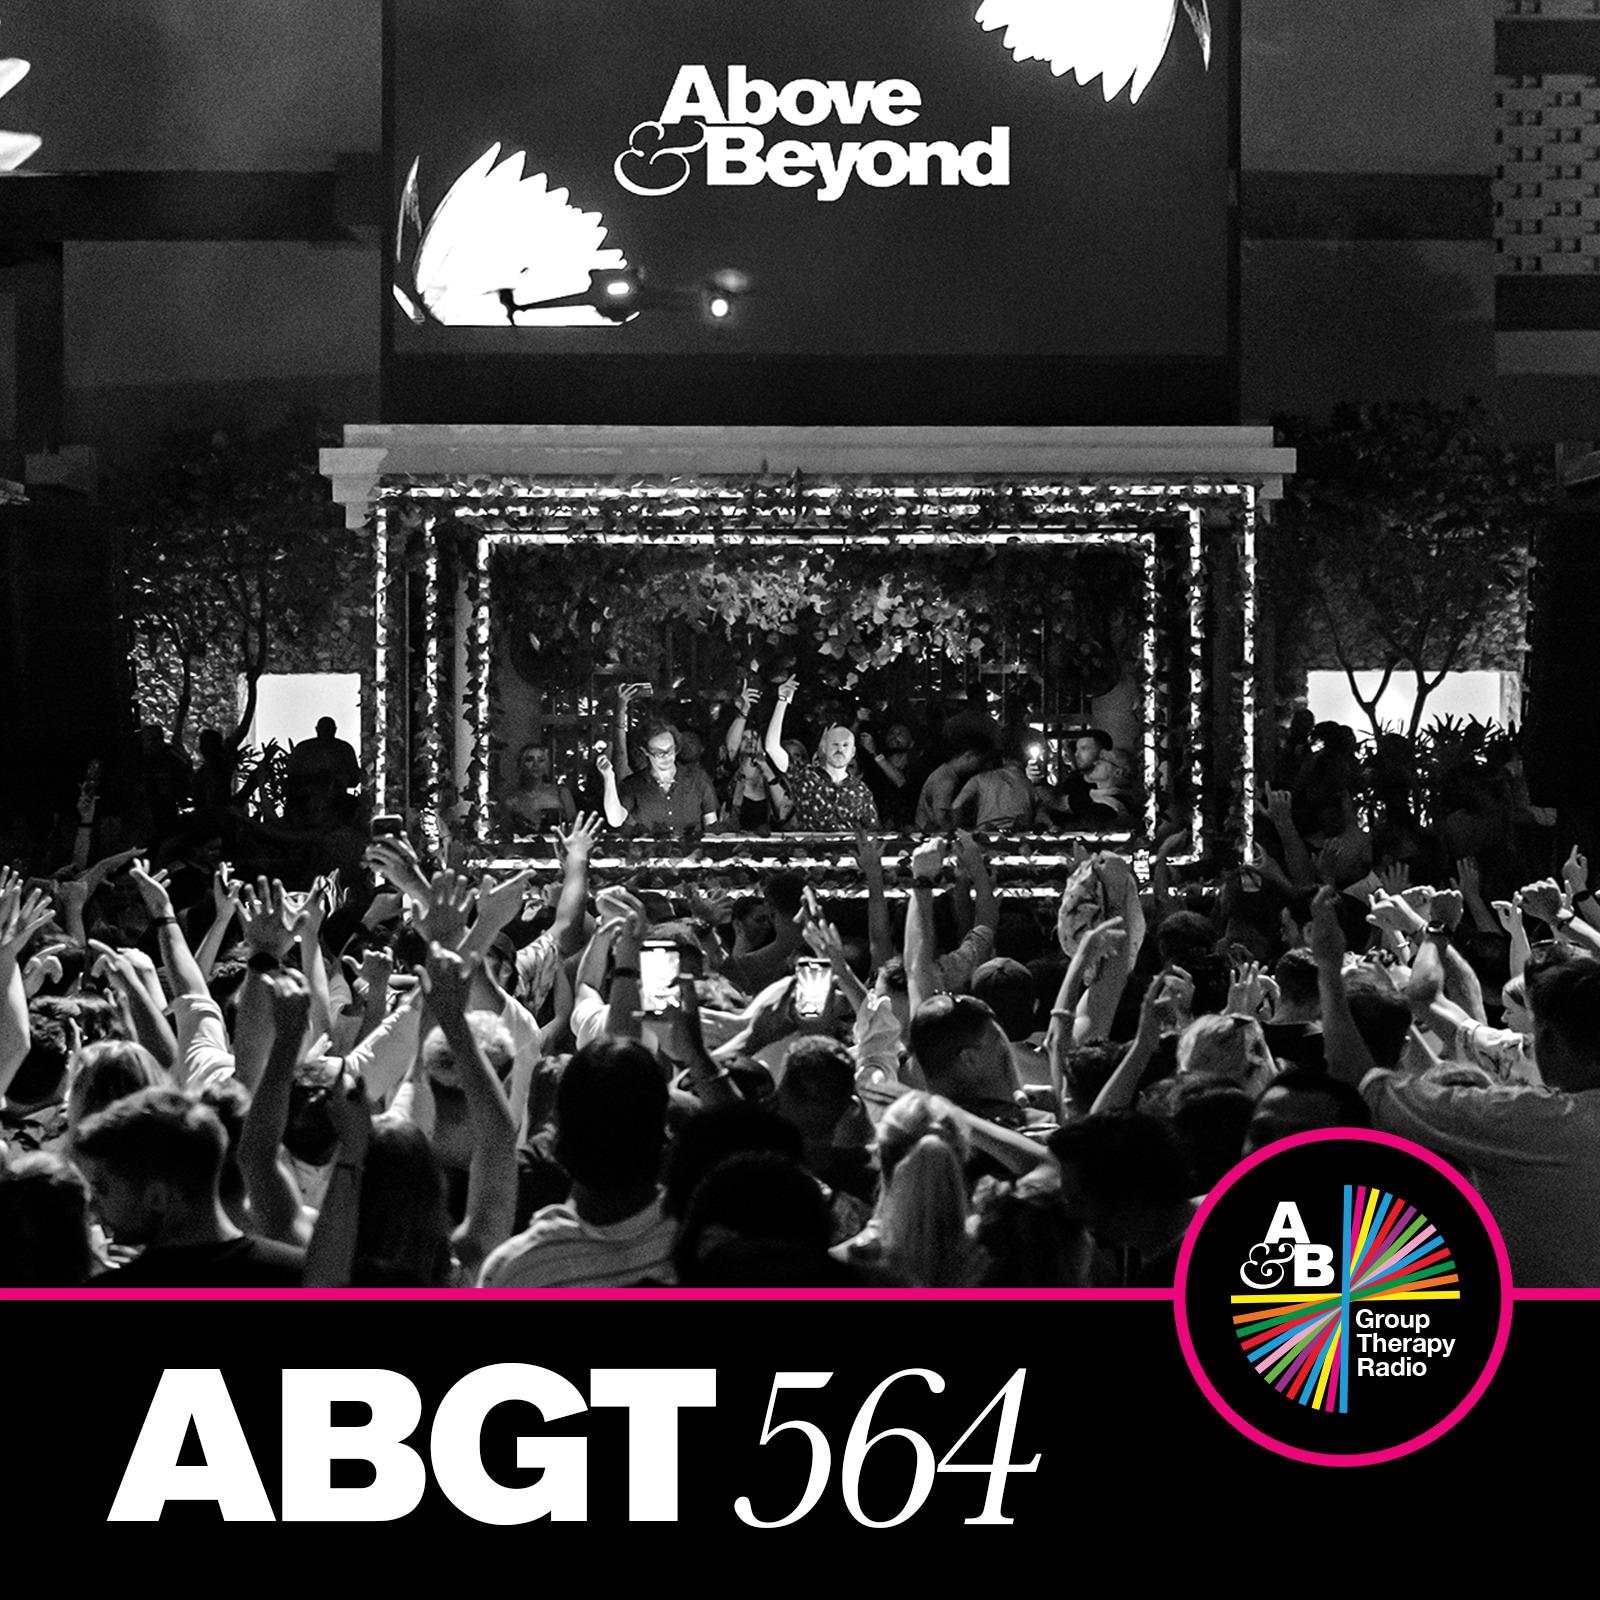 Yotto - Will You Remember Me? (ABGT564)